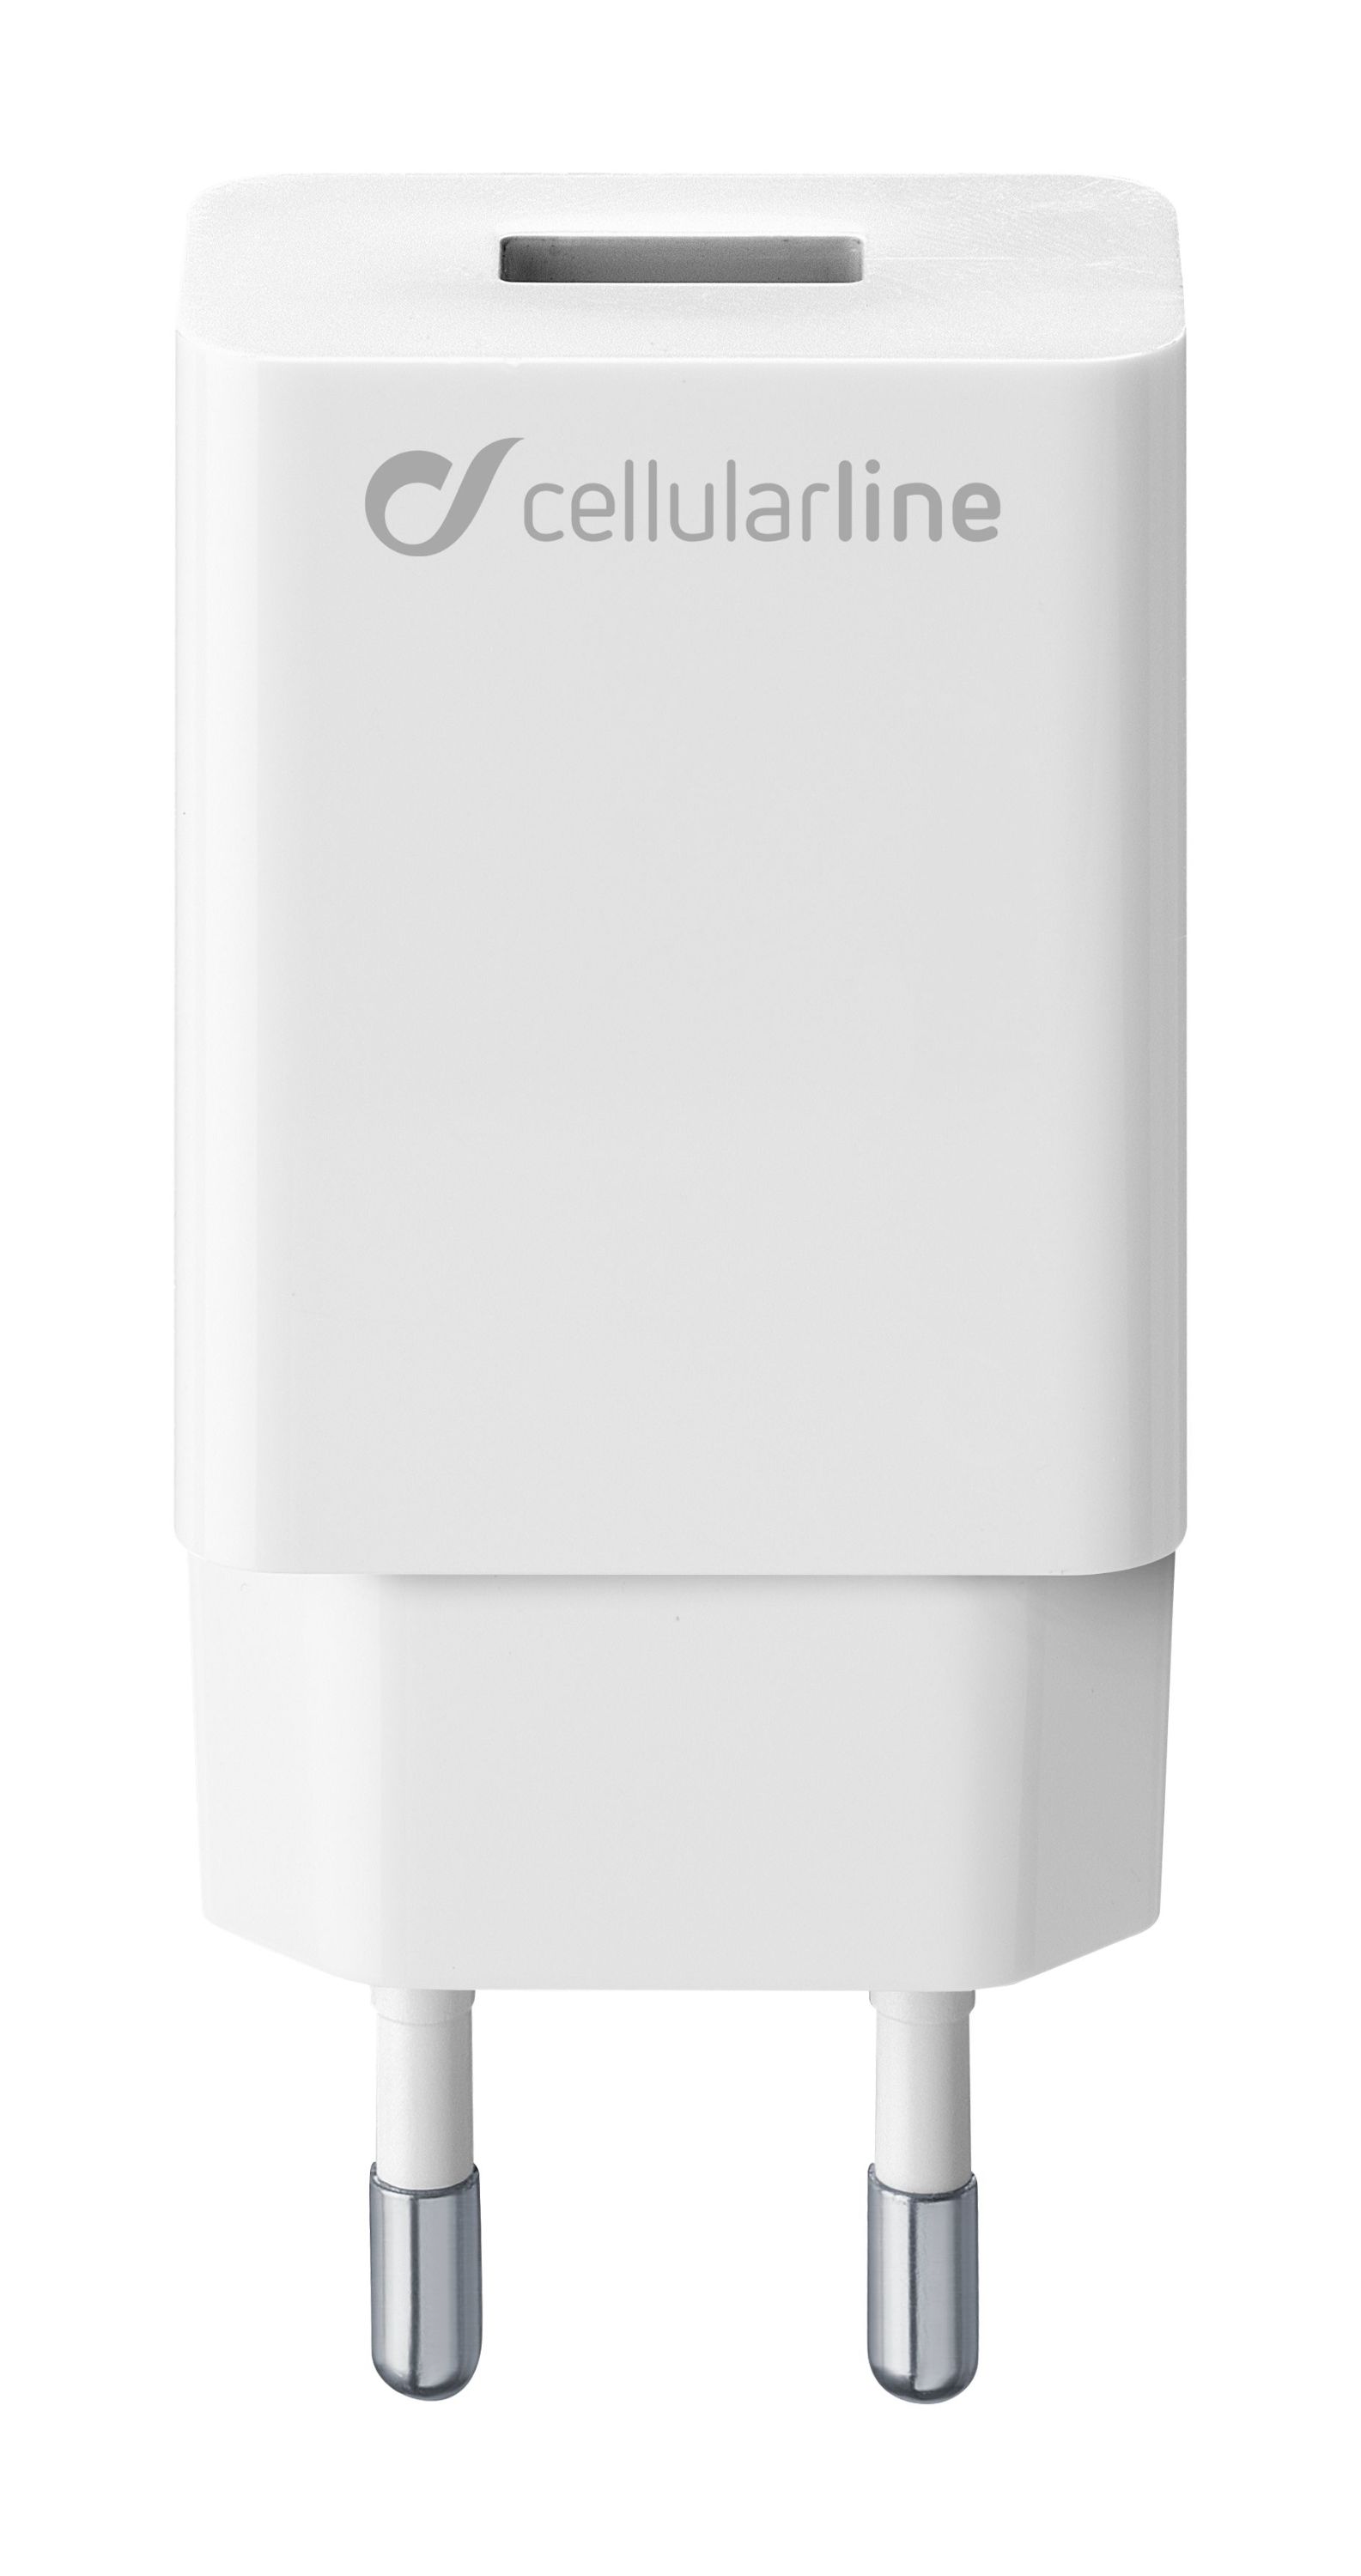 Travel charger usb, 10W/2A Samsung, white